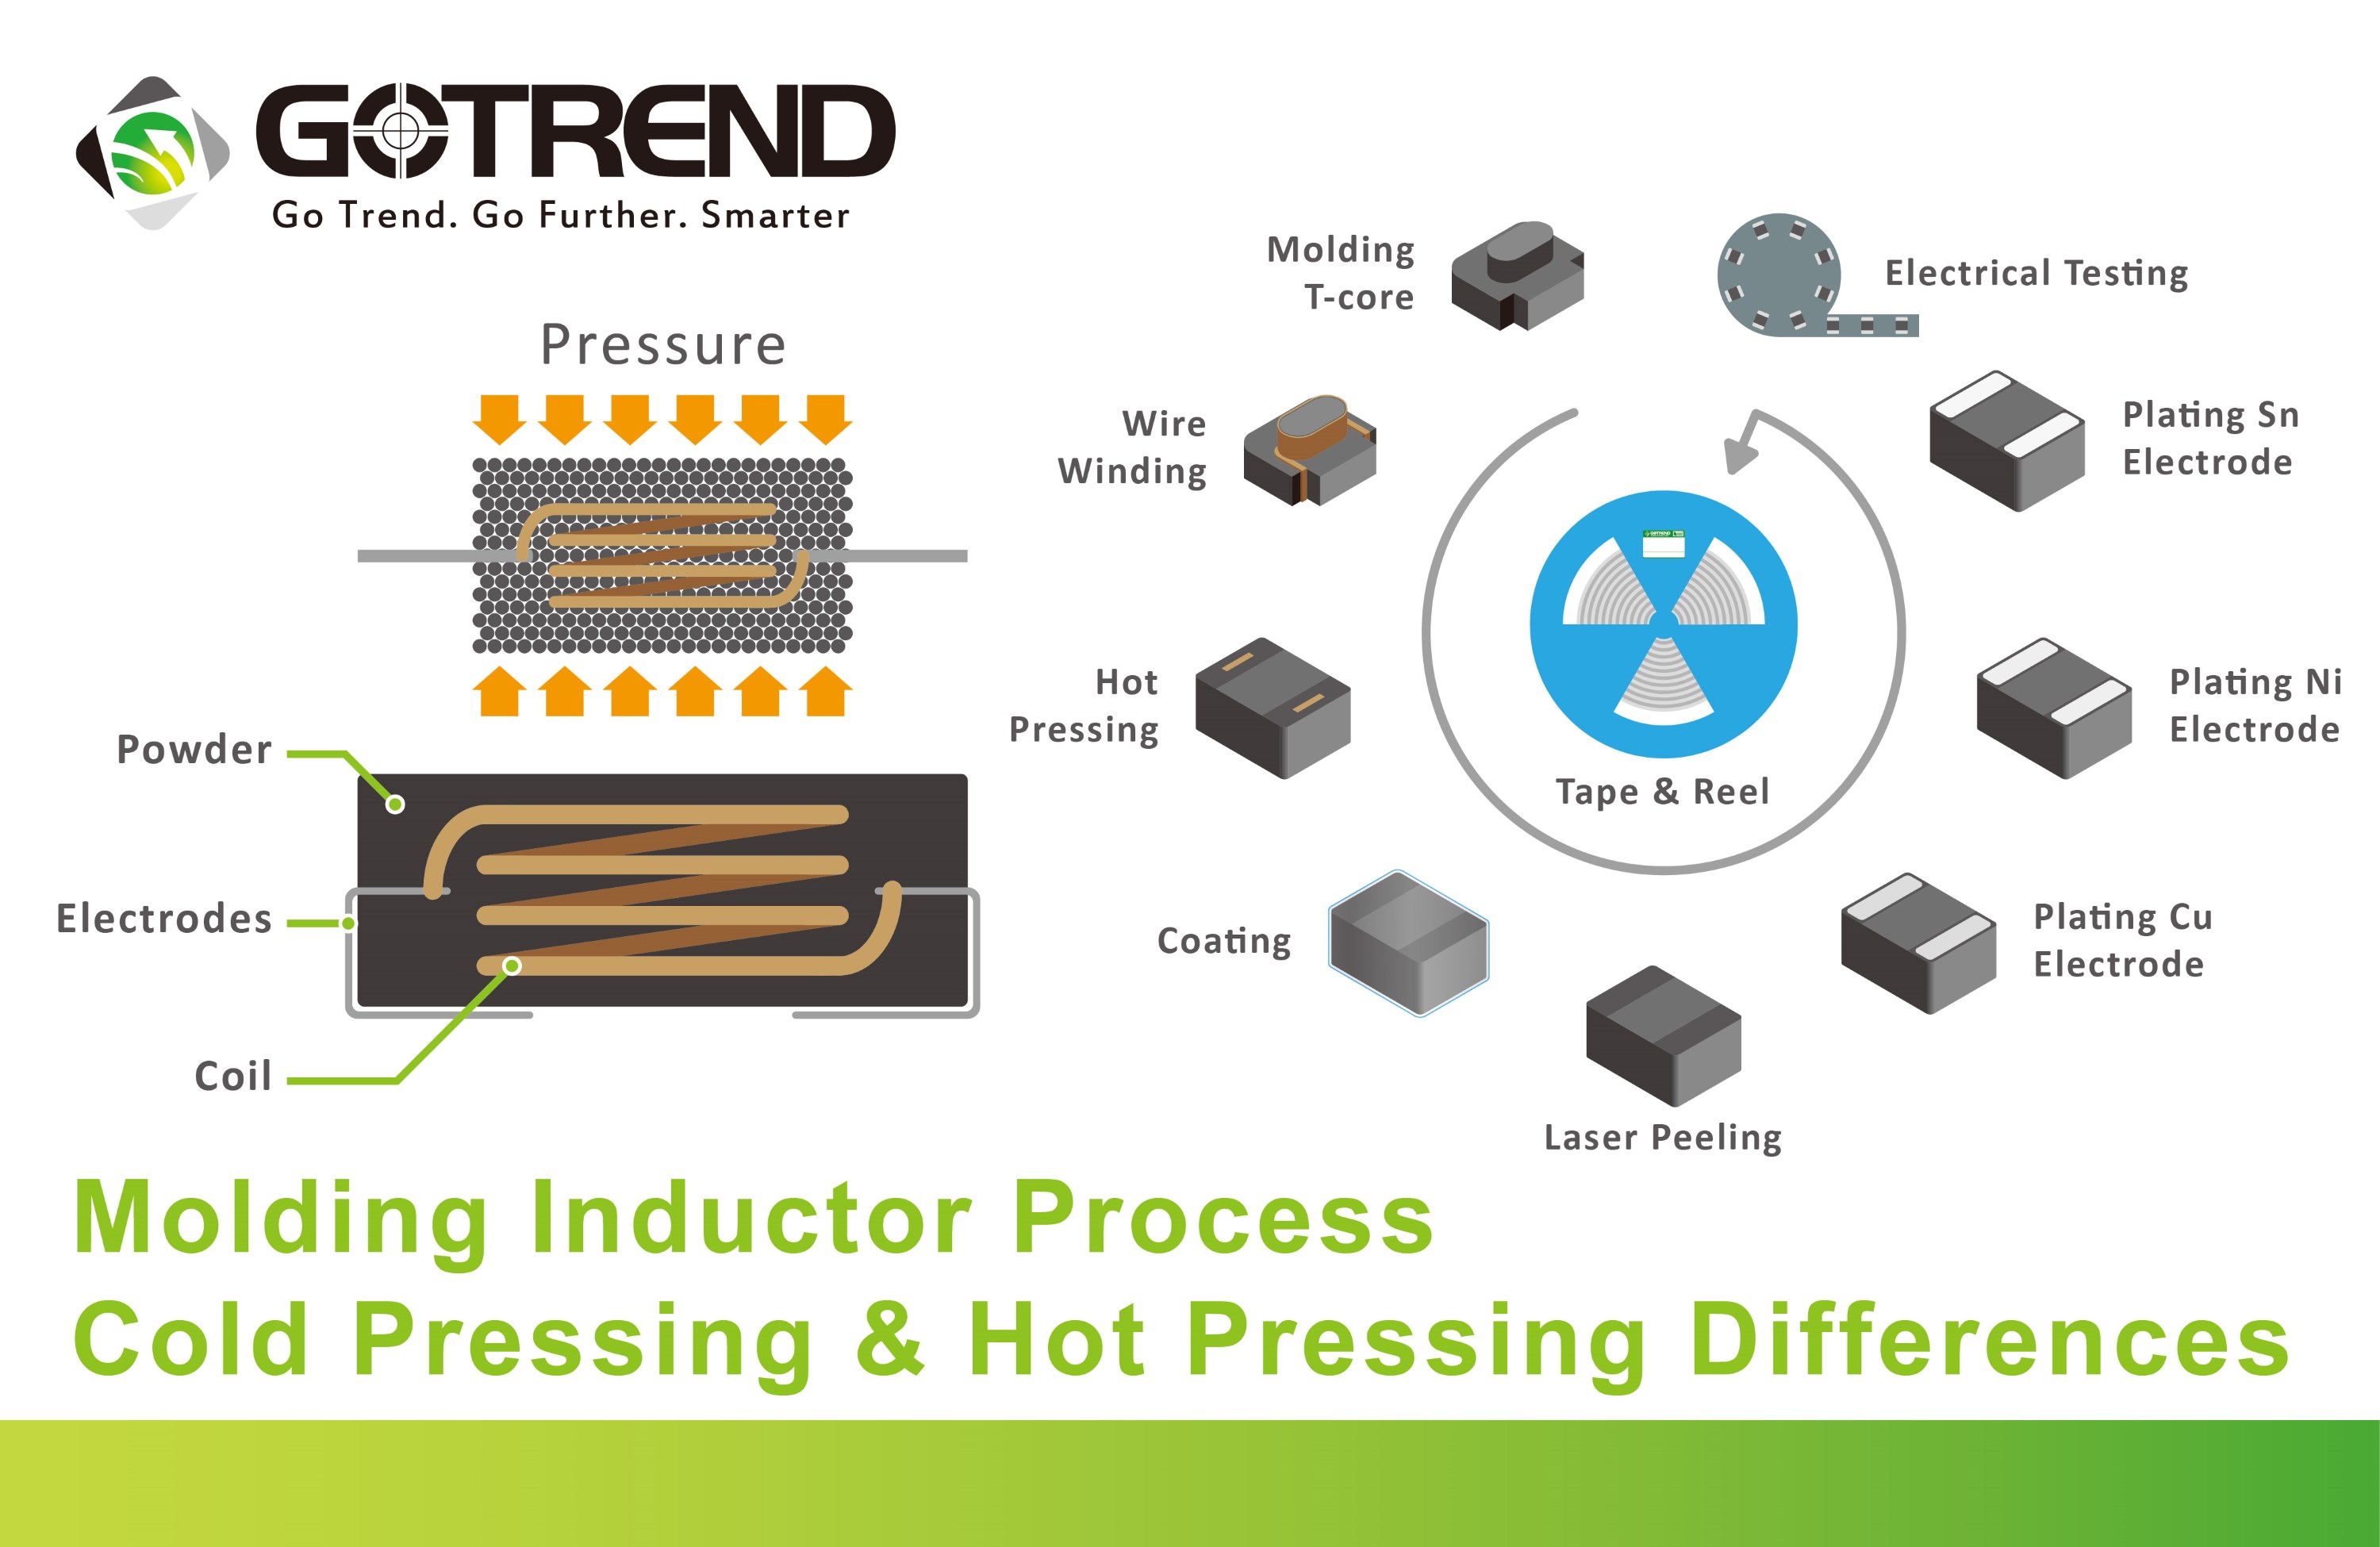 Differences in the cold and hot pressing processes of molded inductors.-GOTREND